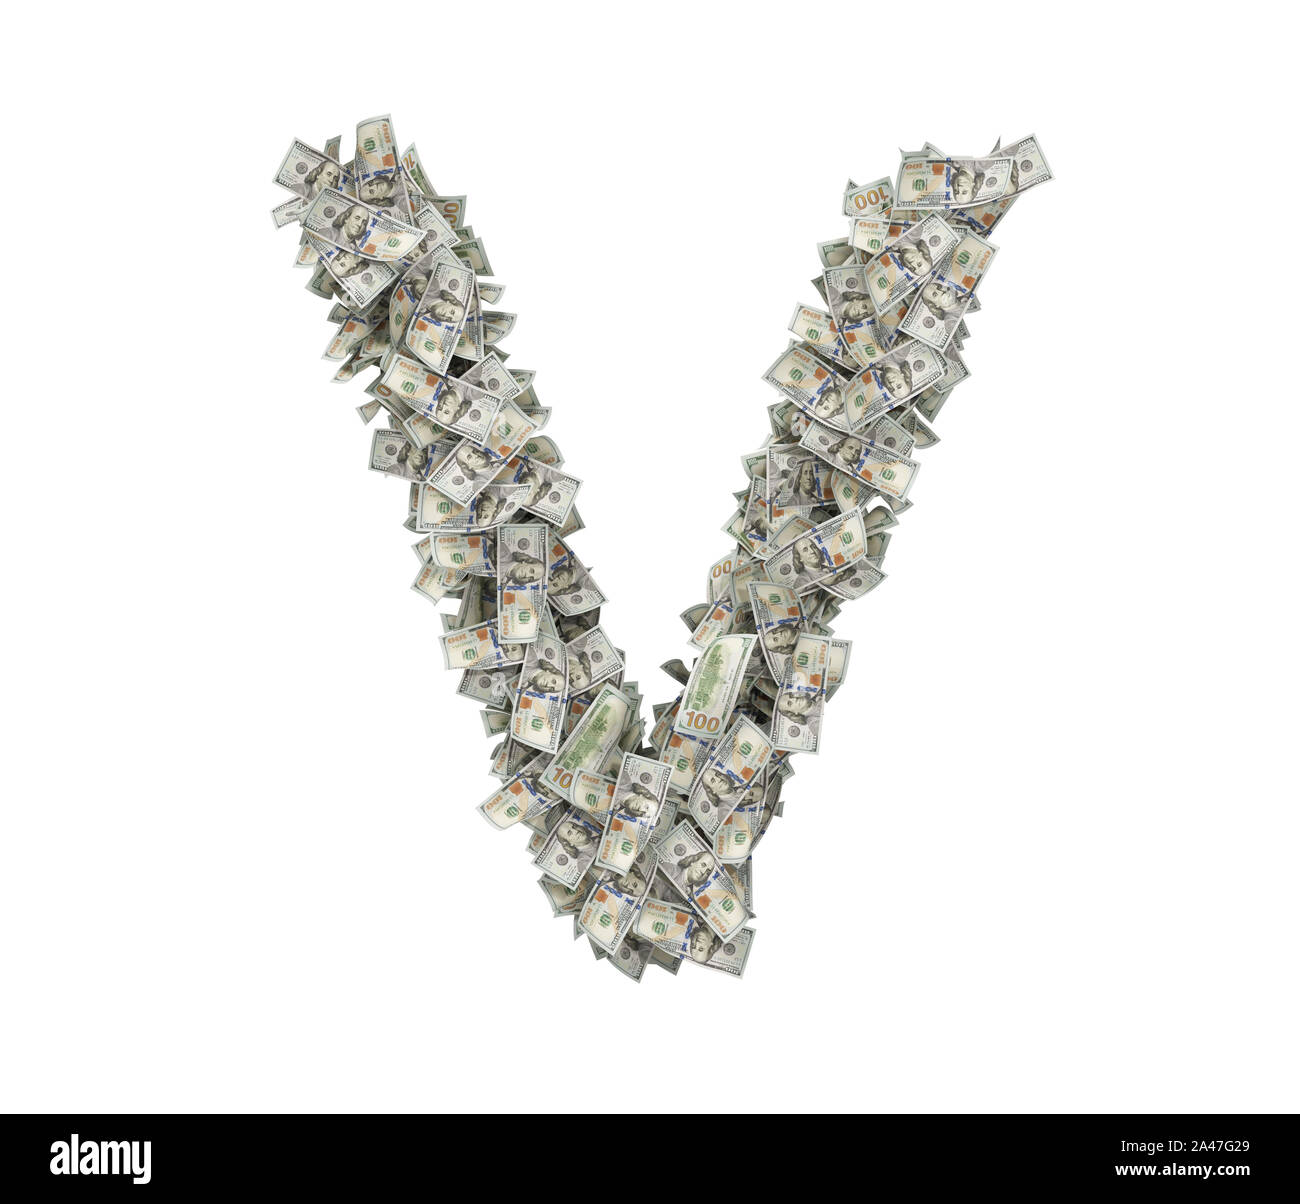 3d rendering of a large isolated large letter V made of many one hundred dollar bills. Money and bills. American currency. Alphabet and letters. Stock Photo